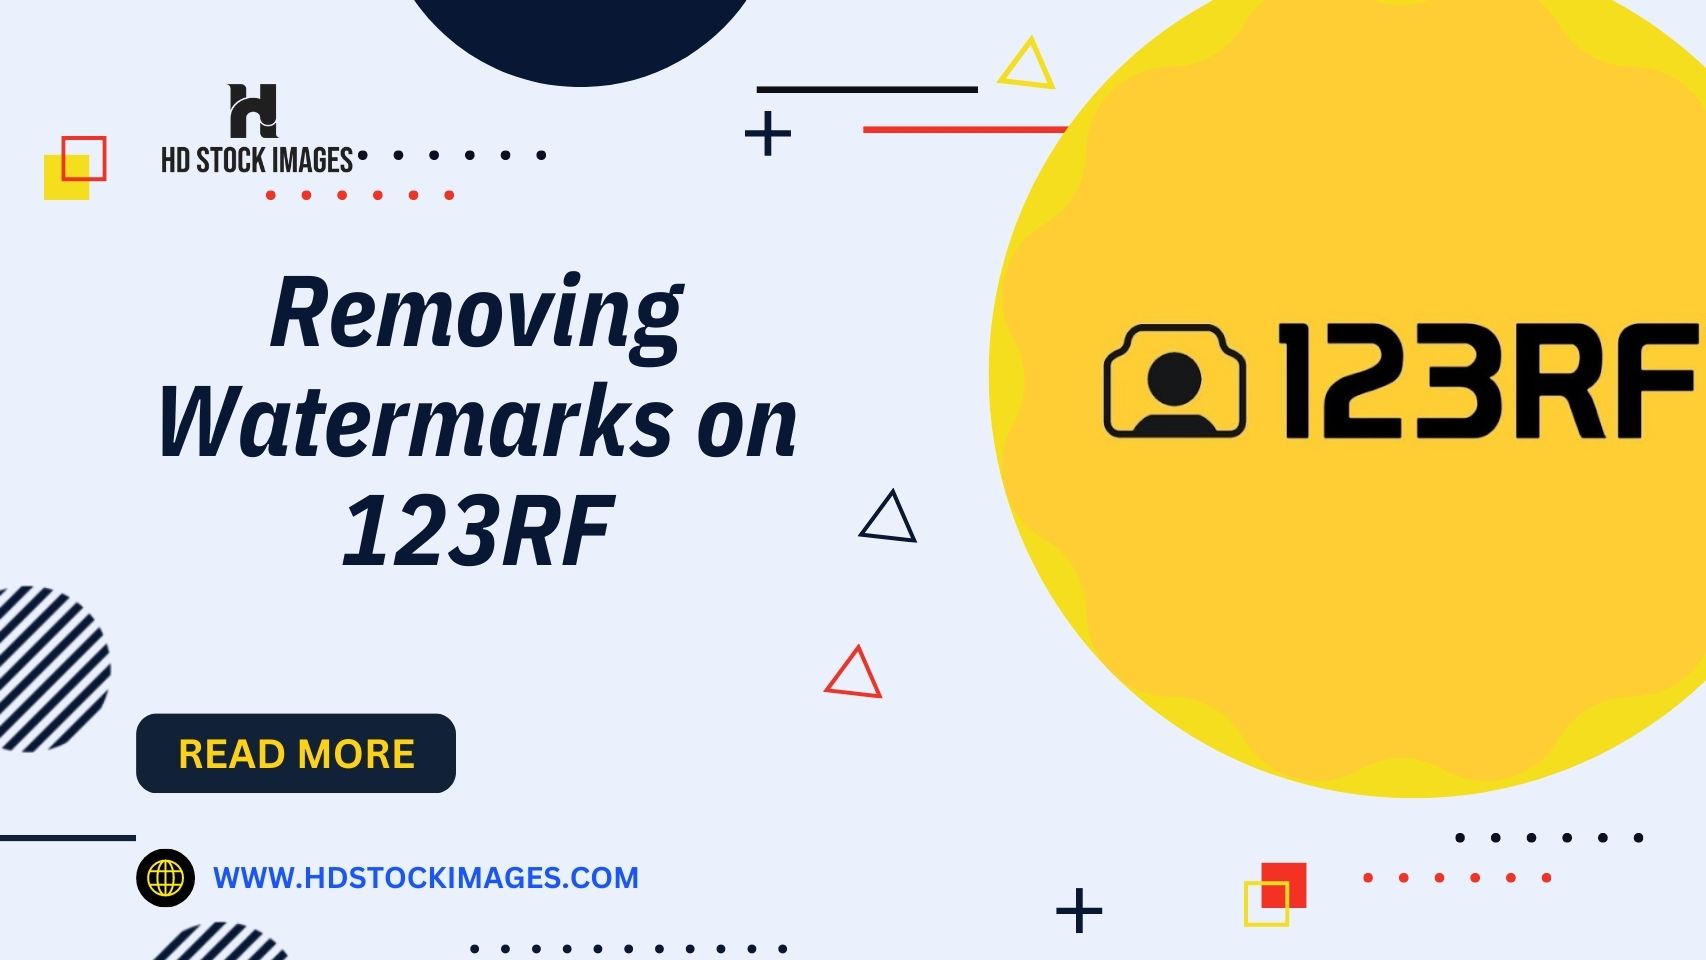 Removing Watermarks on 123RF: Guidelines and Processes